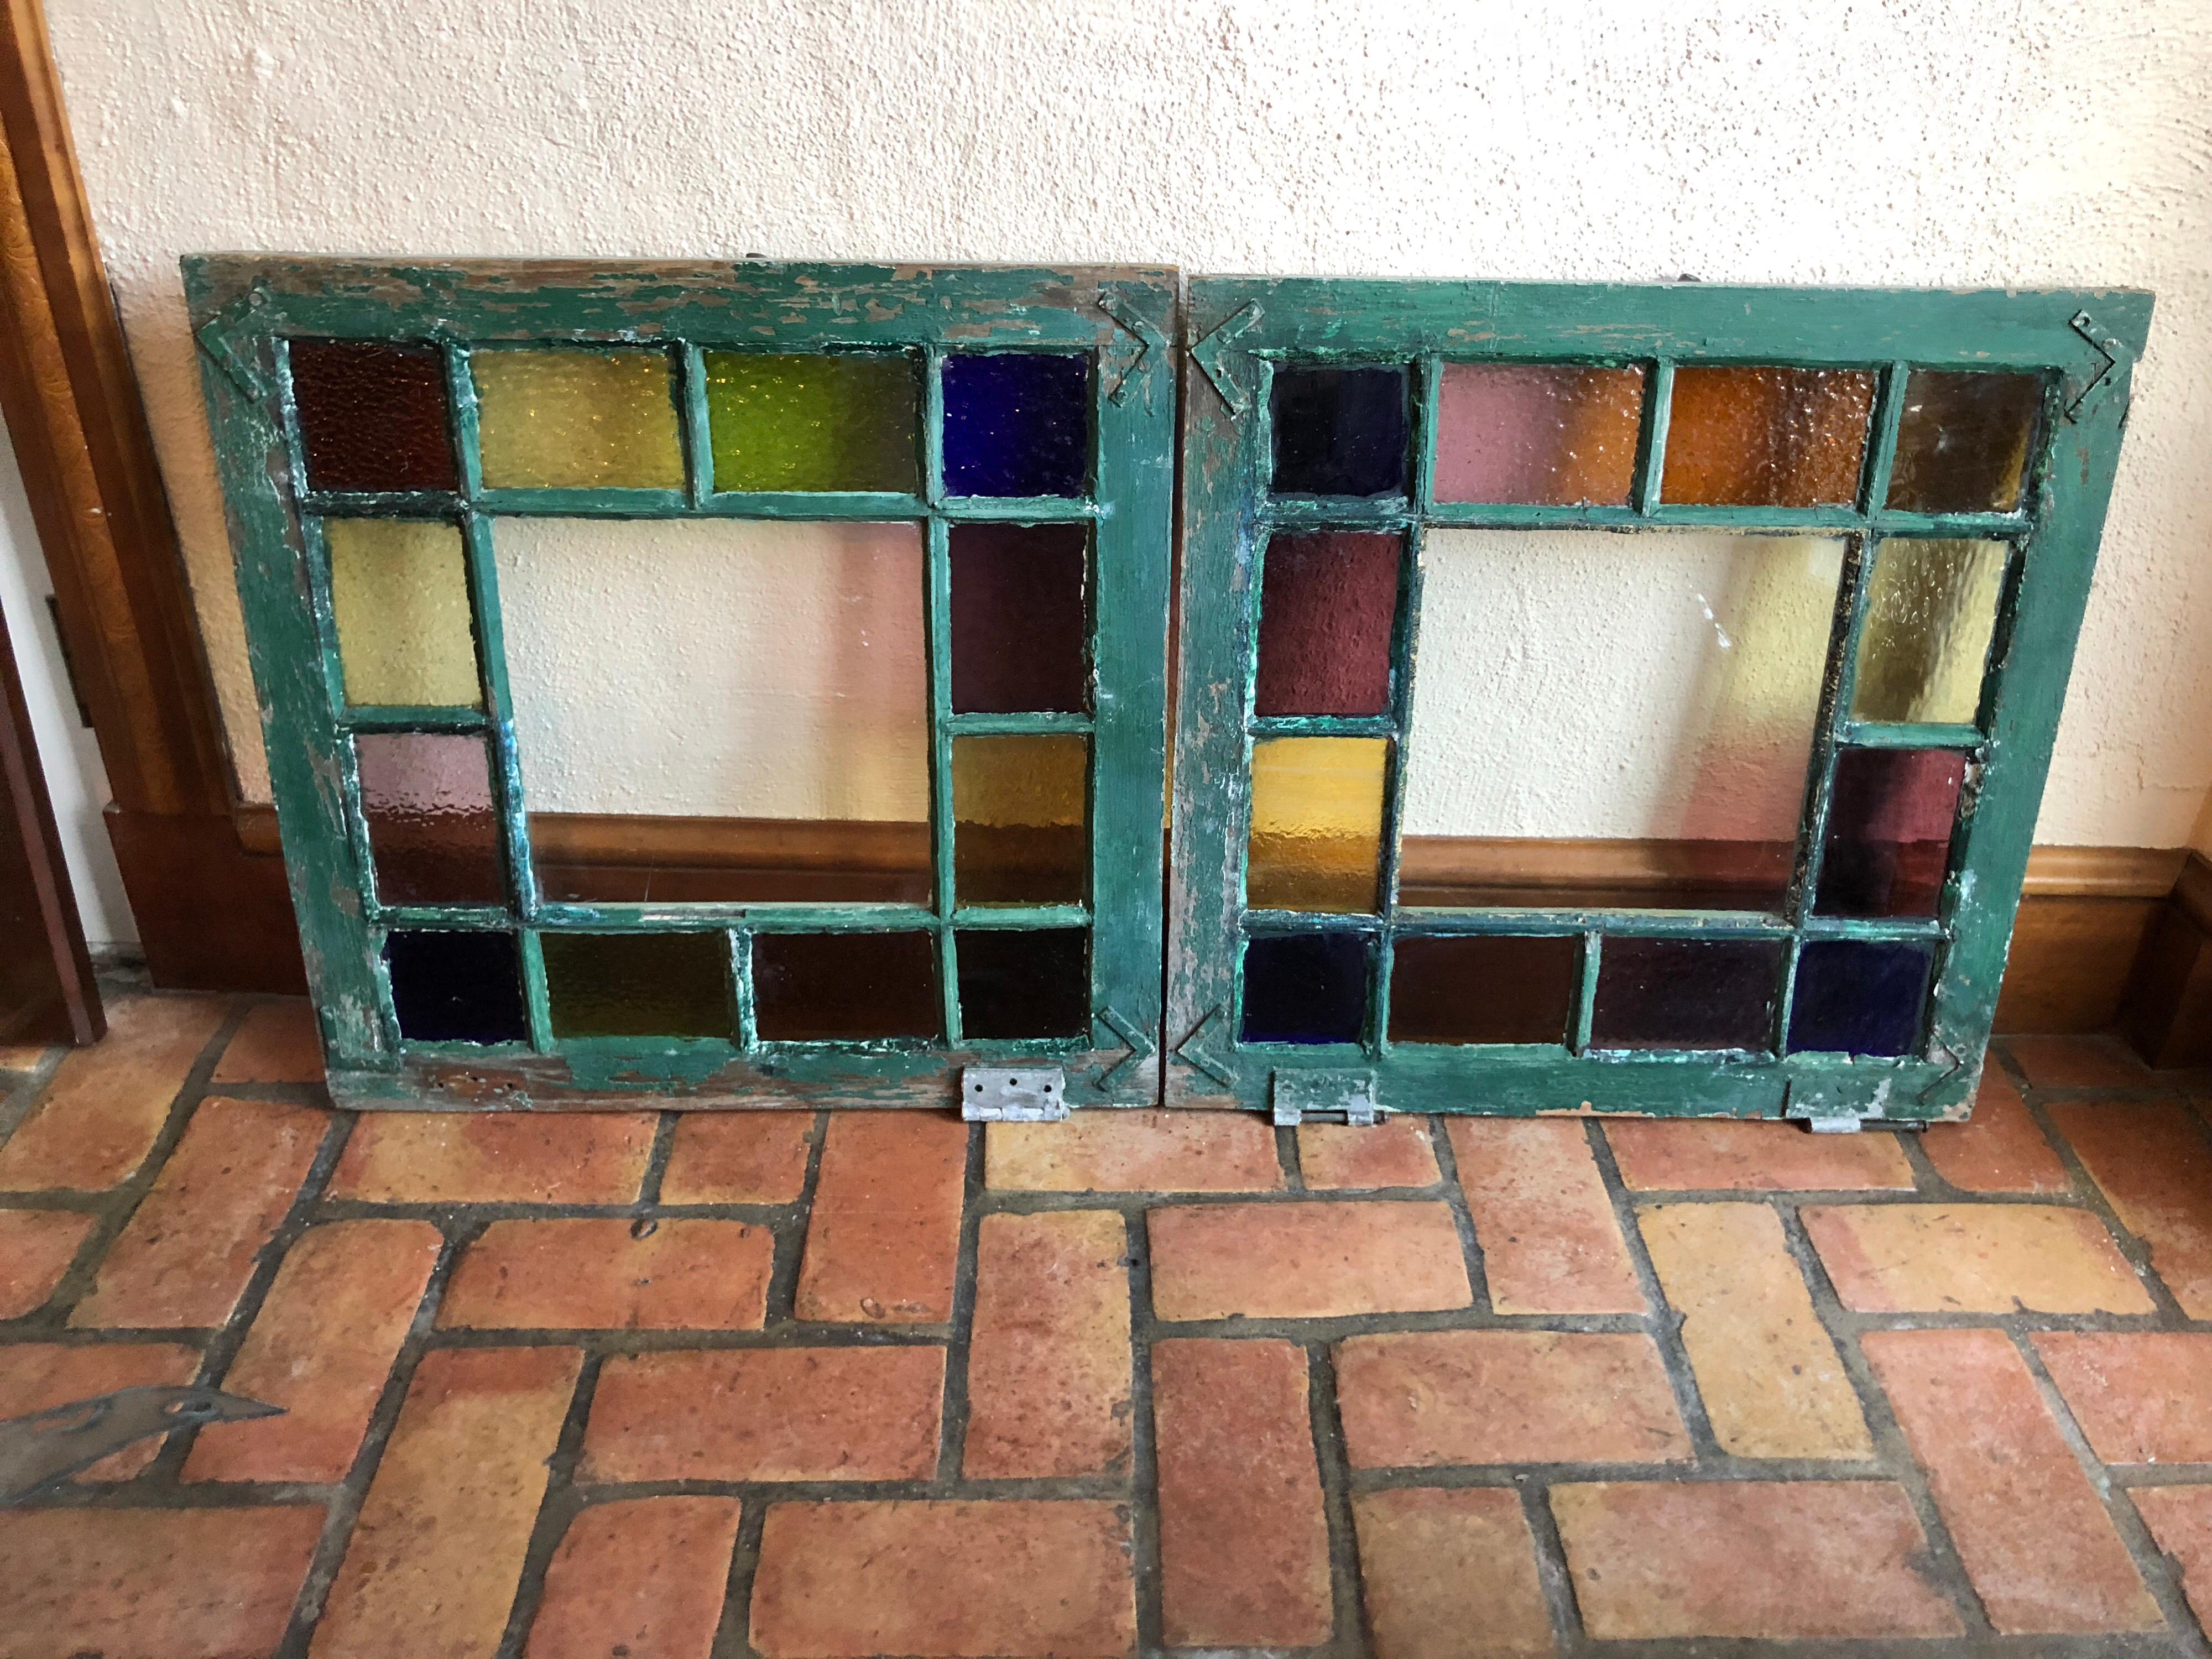 Pair of stained glass windows. Bright and colorful these would add to any interior or exterior project. The colors include cobalt blue , amber, yellow ,green and purple all around the edges. There is a large clear glass panel in the very center of